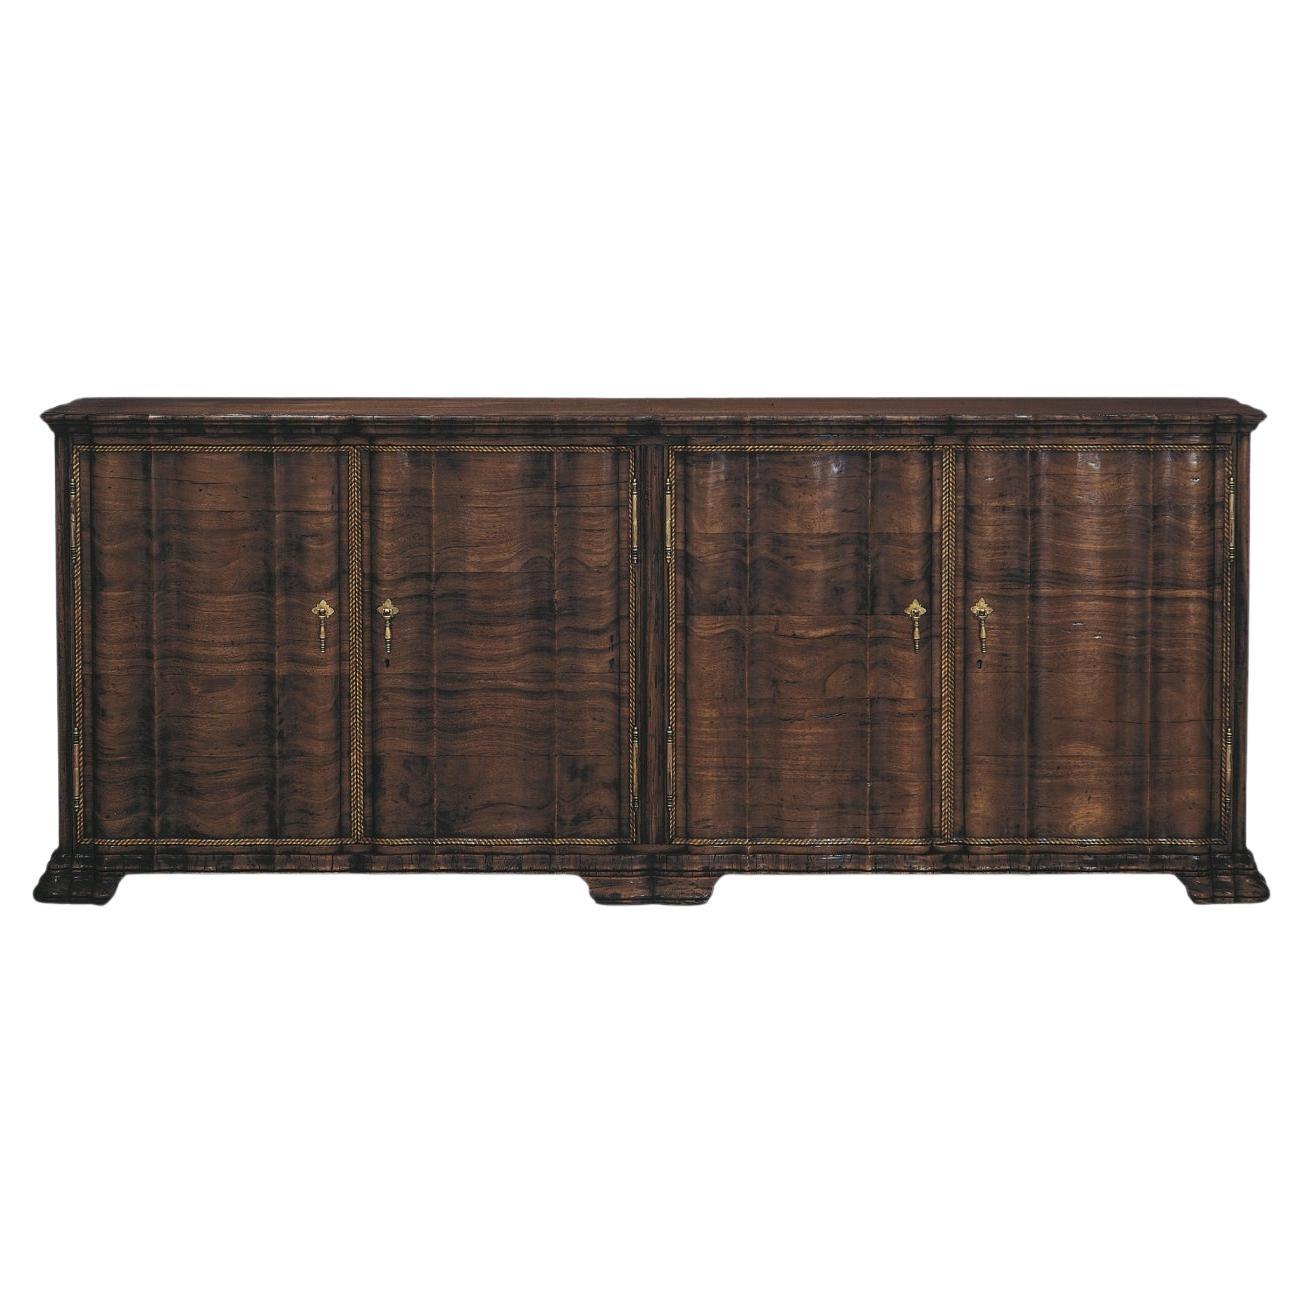 Wood Bernal Buffet with 4 Doors Influenced by Dutch and Indo-Portuguese Style For Sale